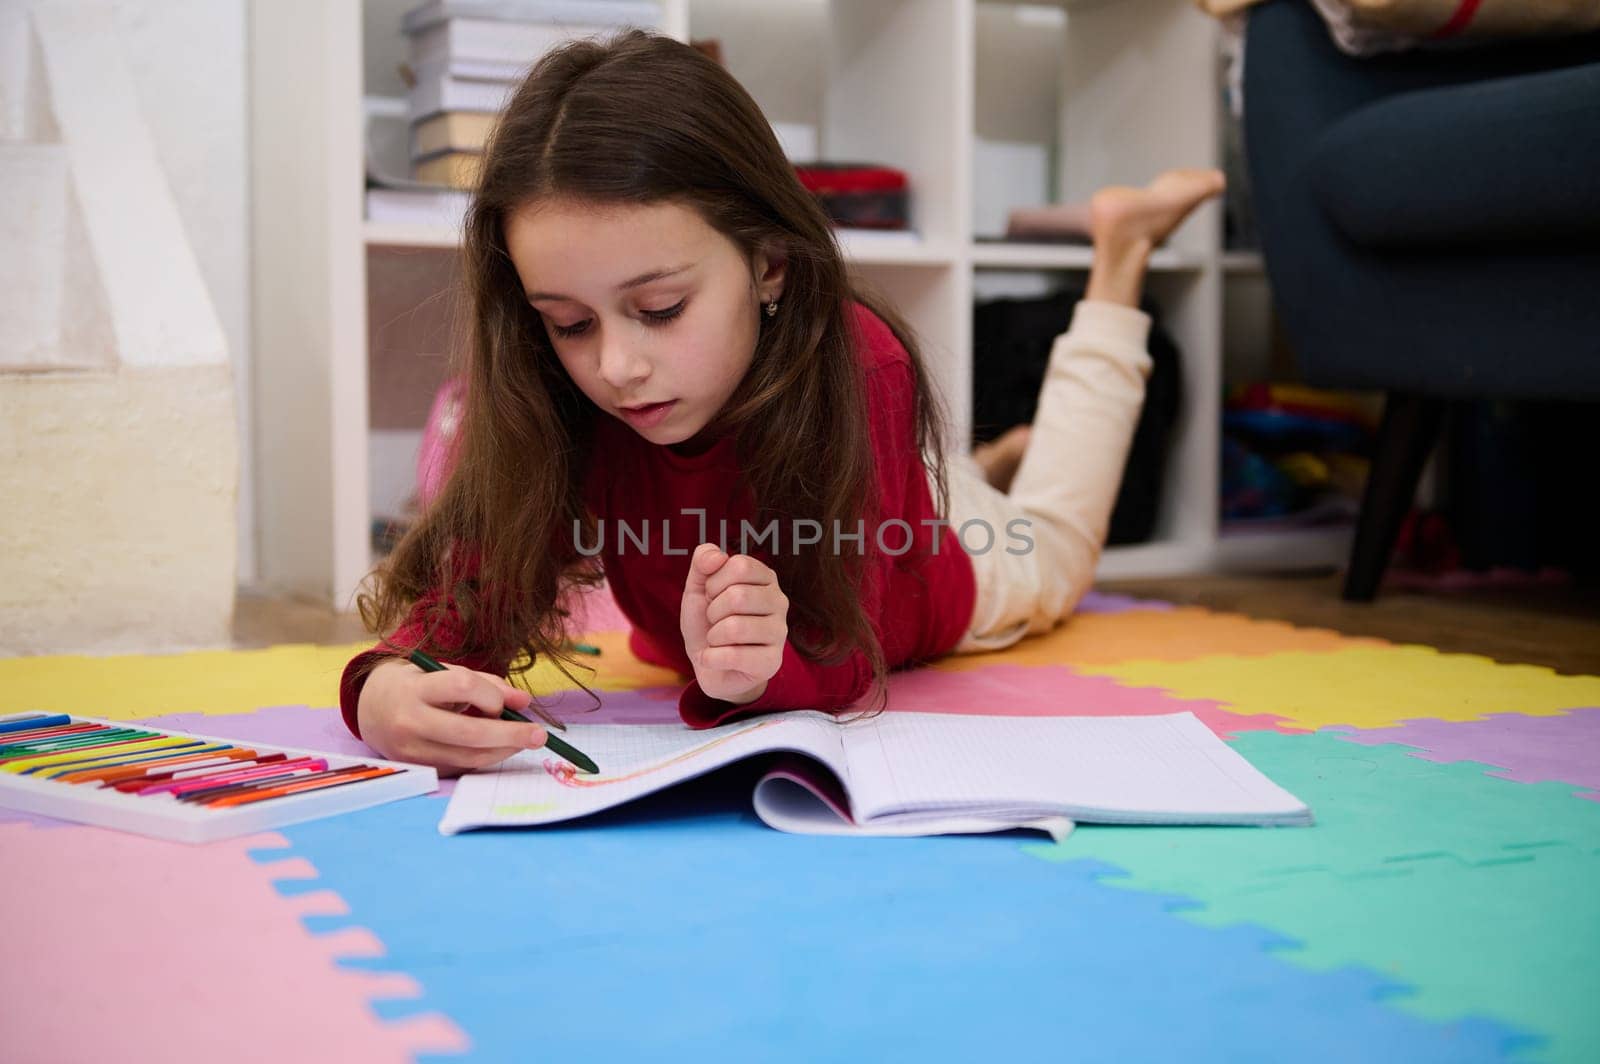 Authentic portrait of Caucasian elementary age school child girl doing homework, drawing picture with colorful, pastel pencils, writing and reading at home, lying on a multi colored puzzle carpet